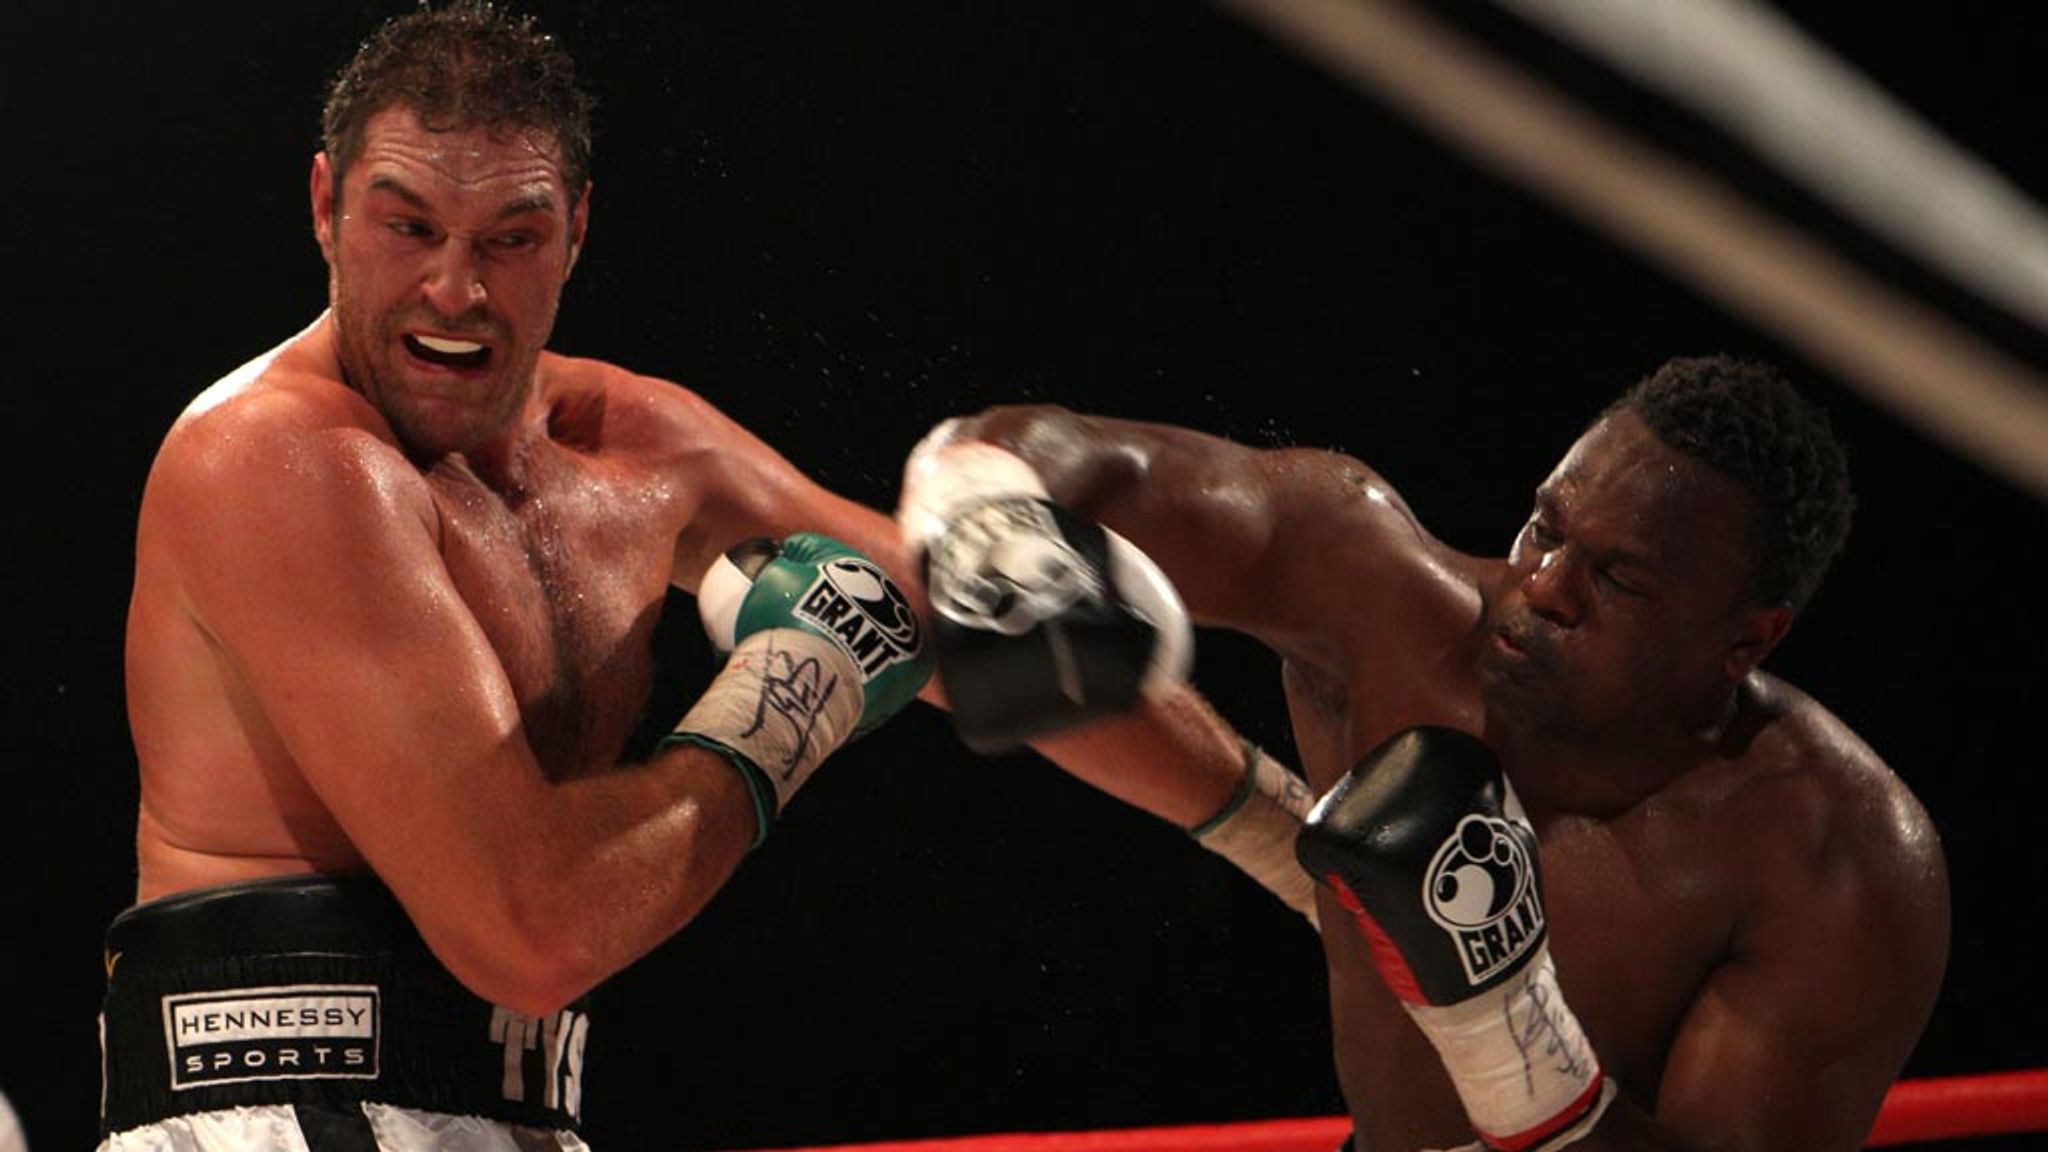 Tyson Fury vs Derek Chisora 3 Who Is the Better Knockout Artist Between Fury and Chisora?